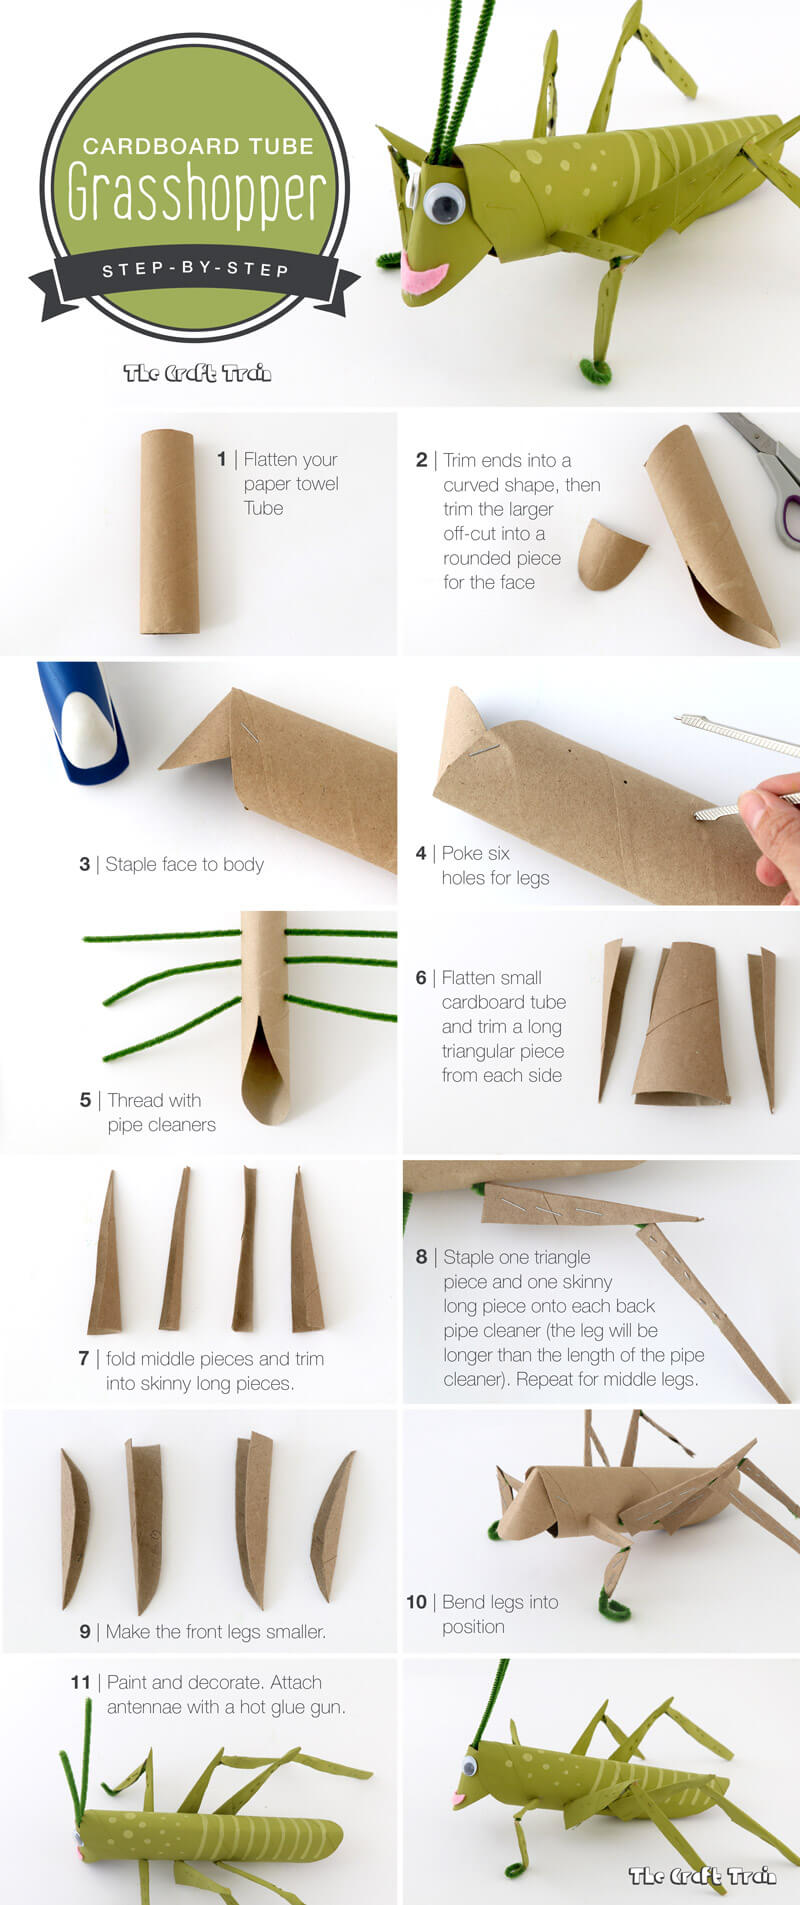 Step-by-step instructions on how to make a cardboard tube grasshopper. This is a fun craft for kids using recyclables.